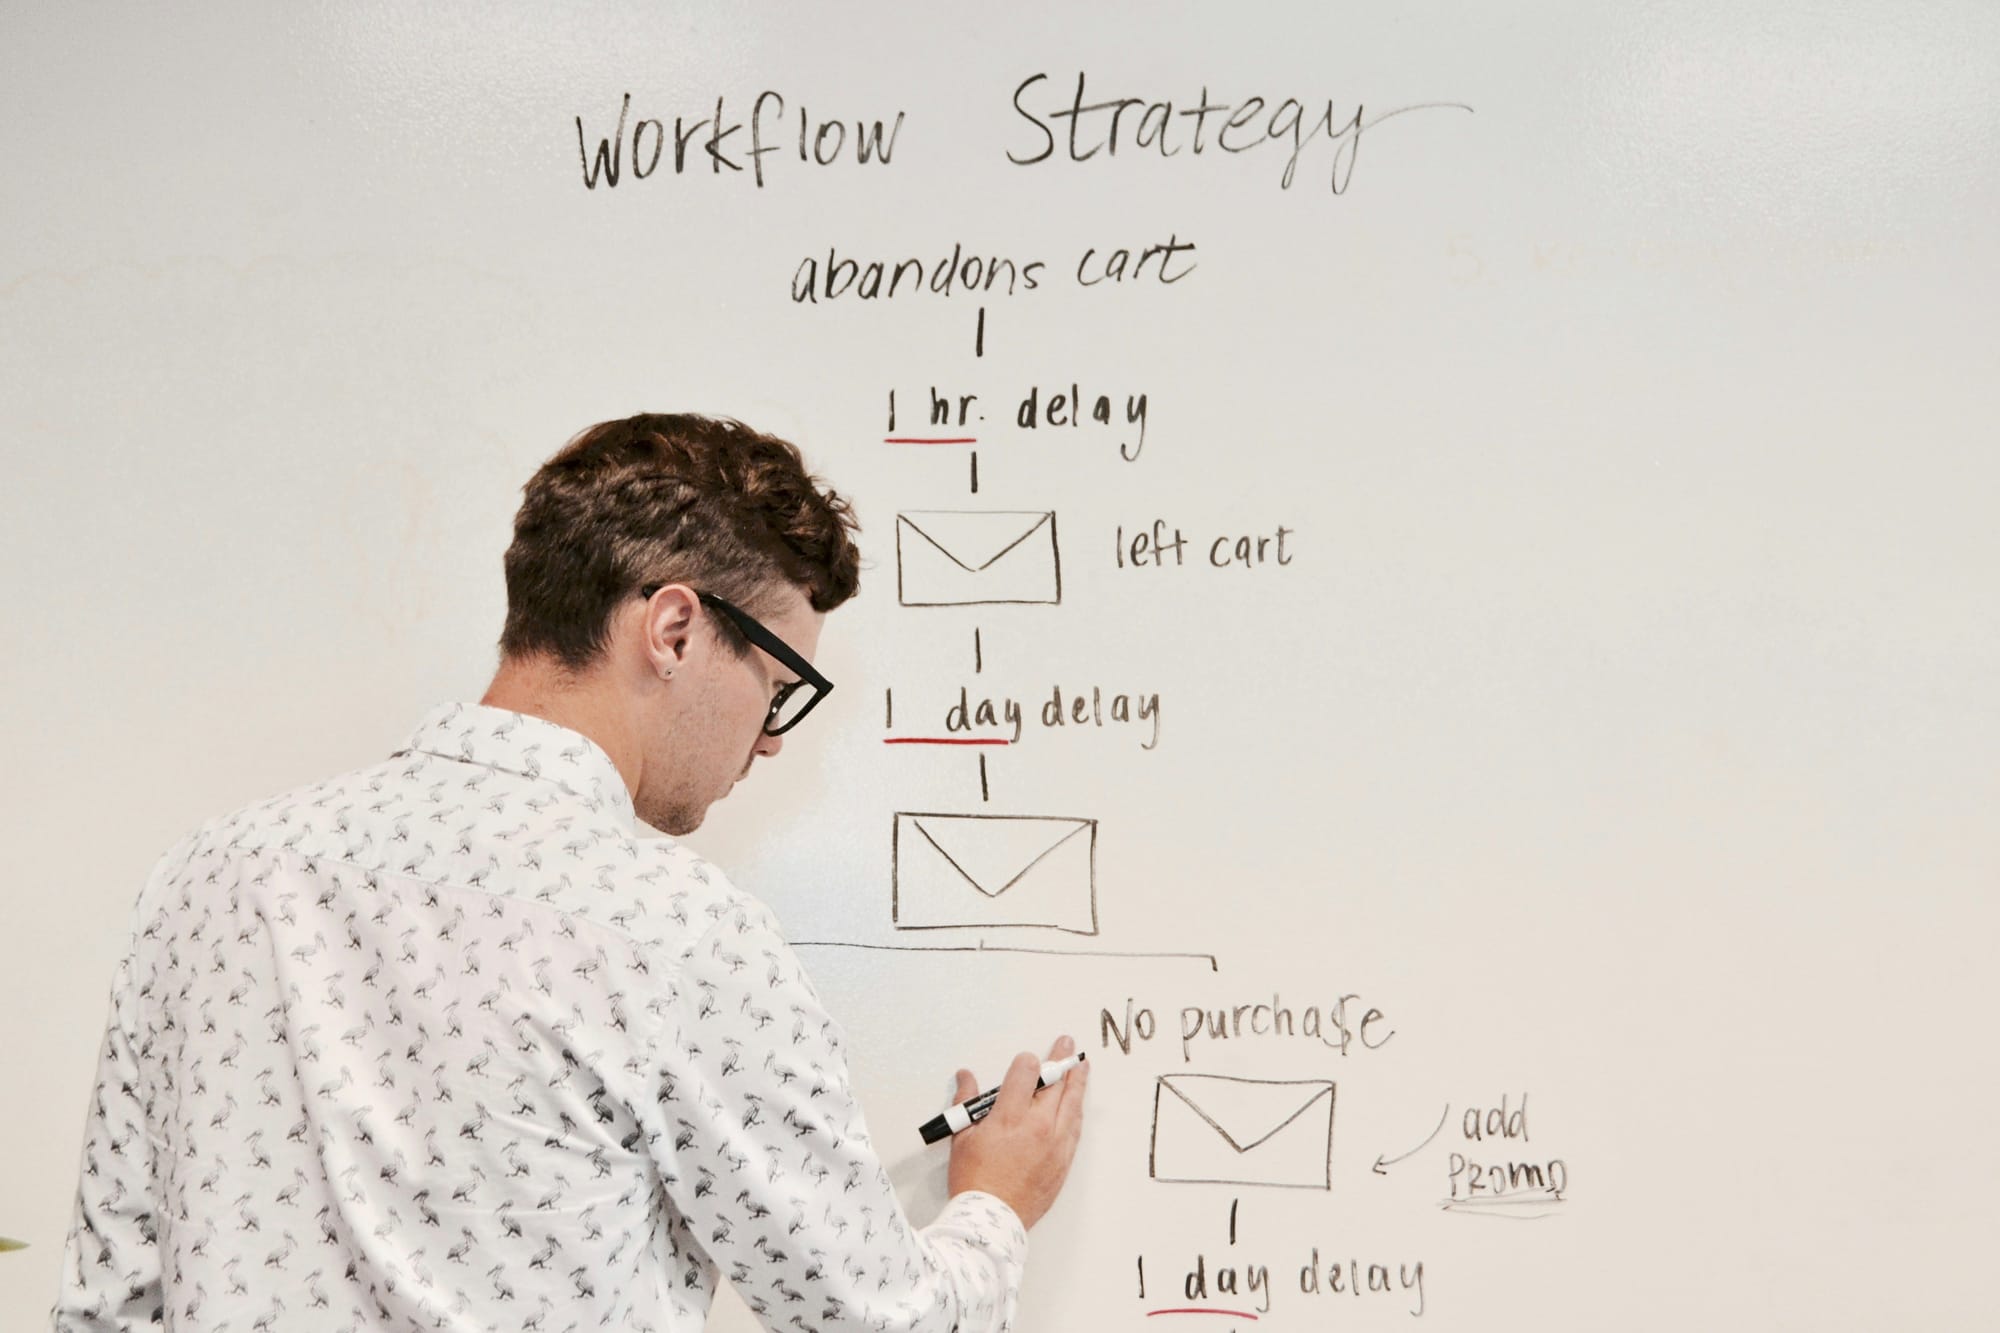 man making workflow on white board - Automate Blog Posts